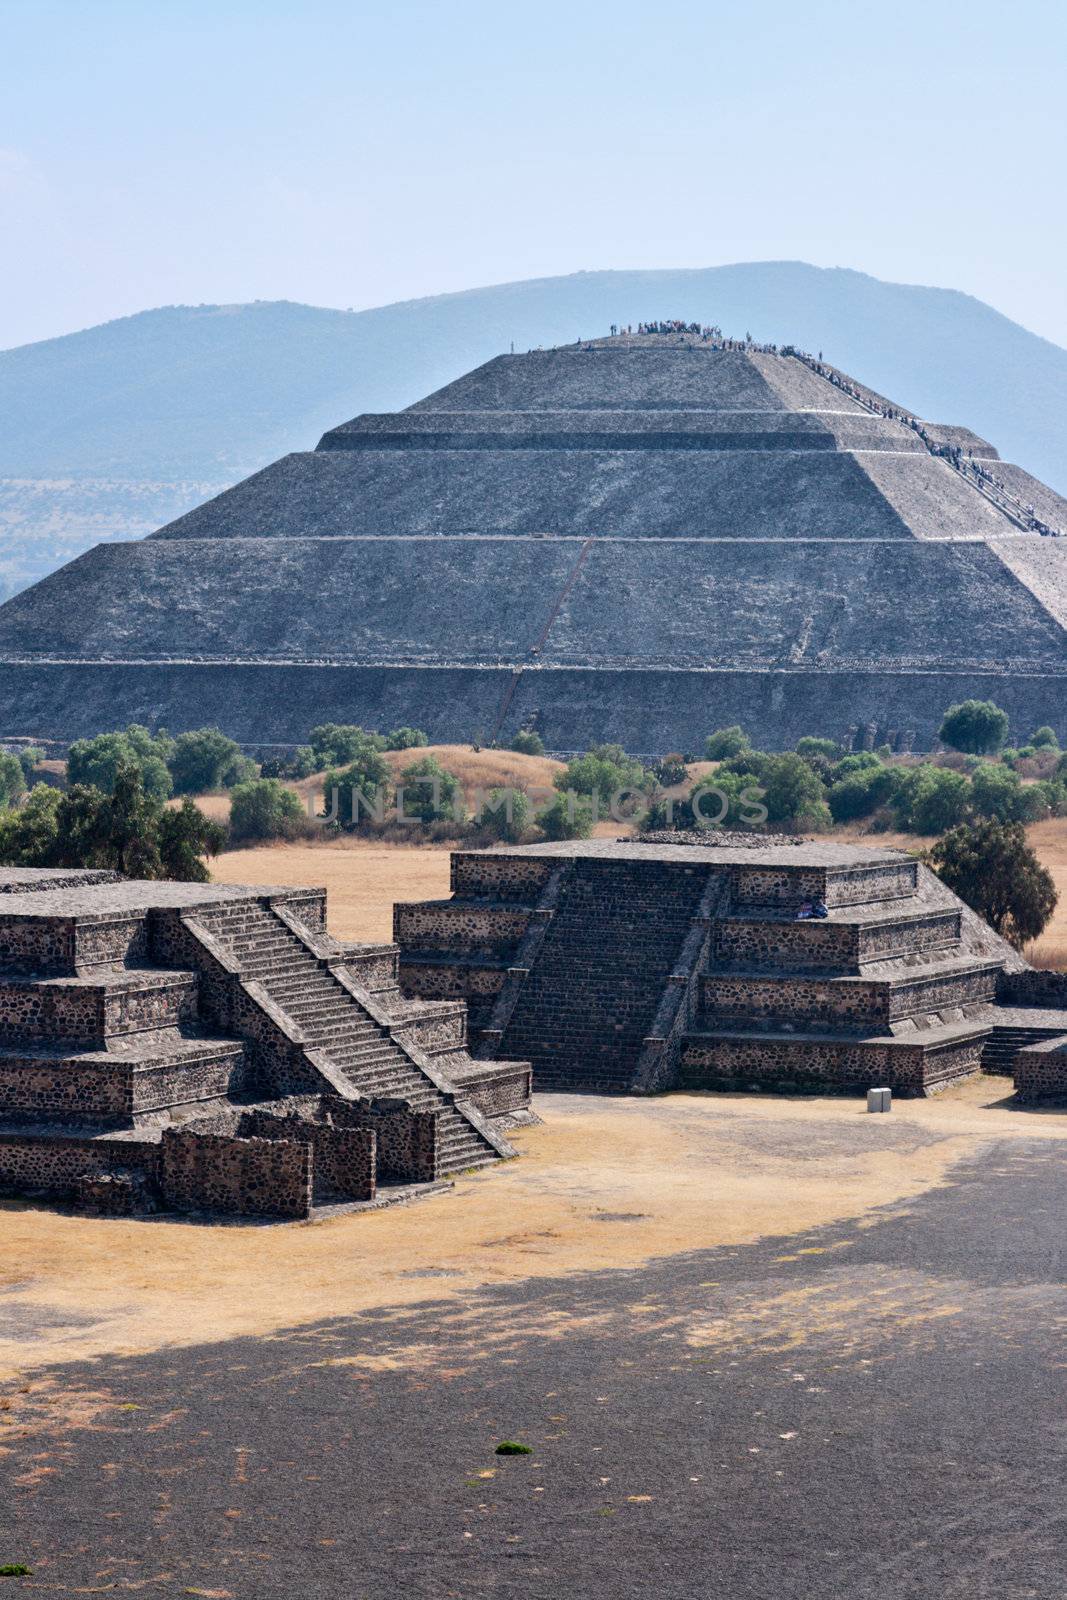 Teotihuacan Pyramids by dimol